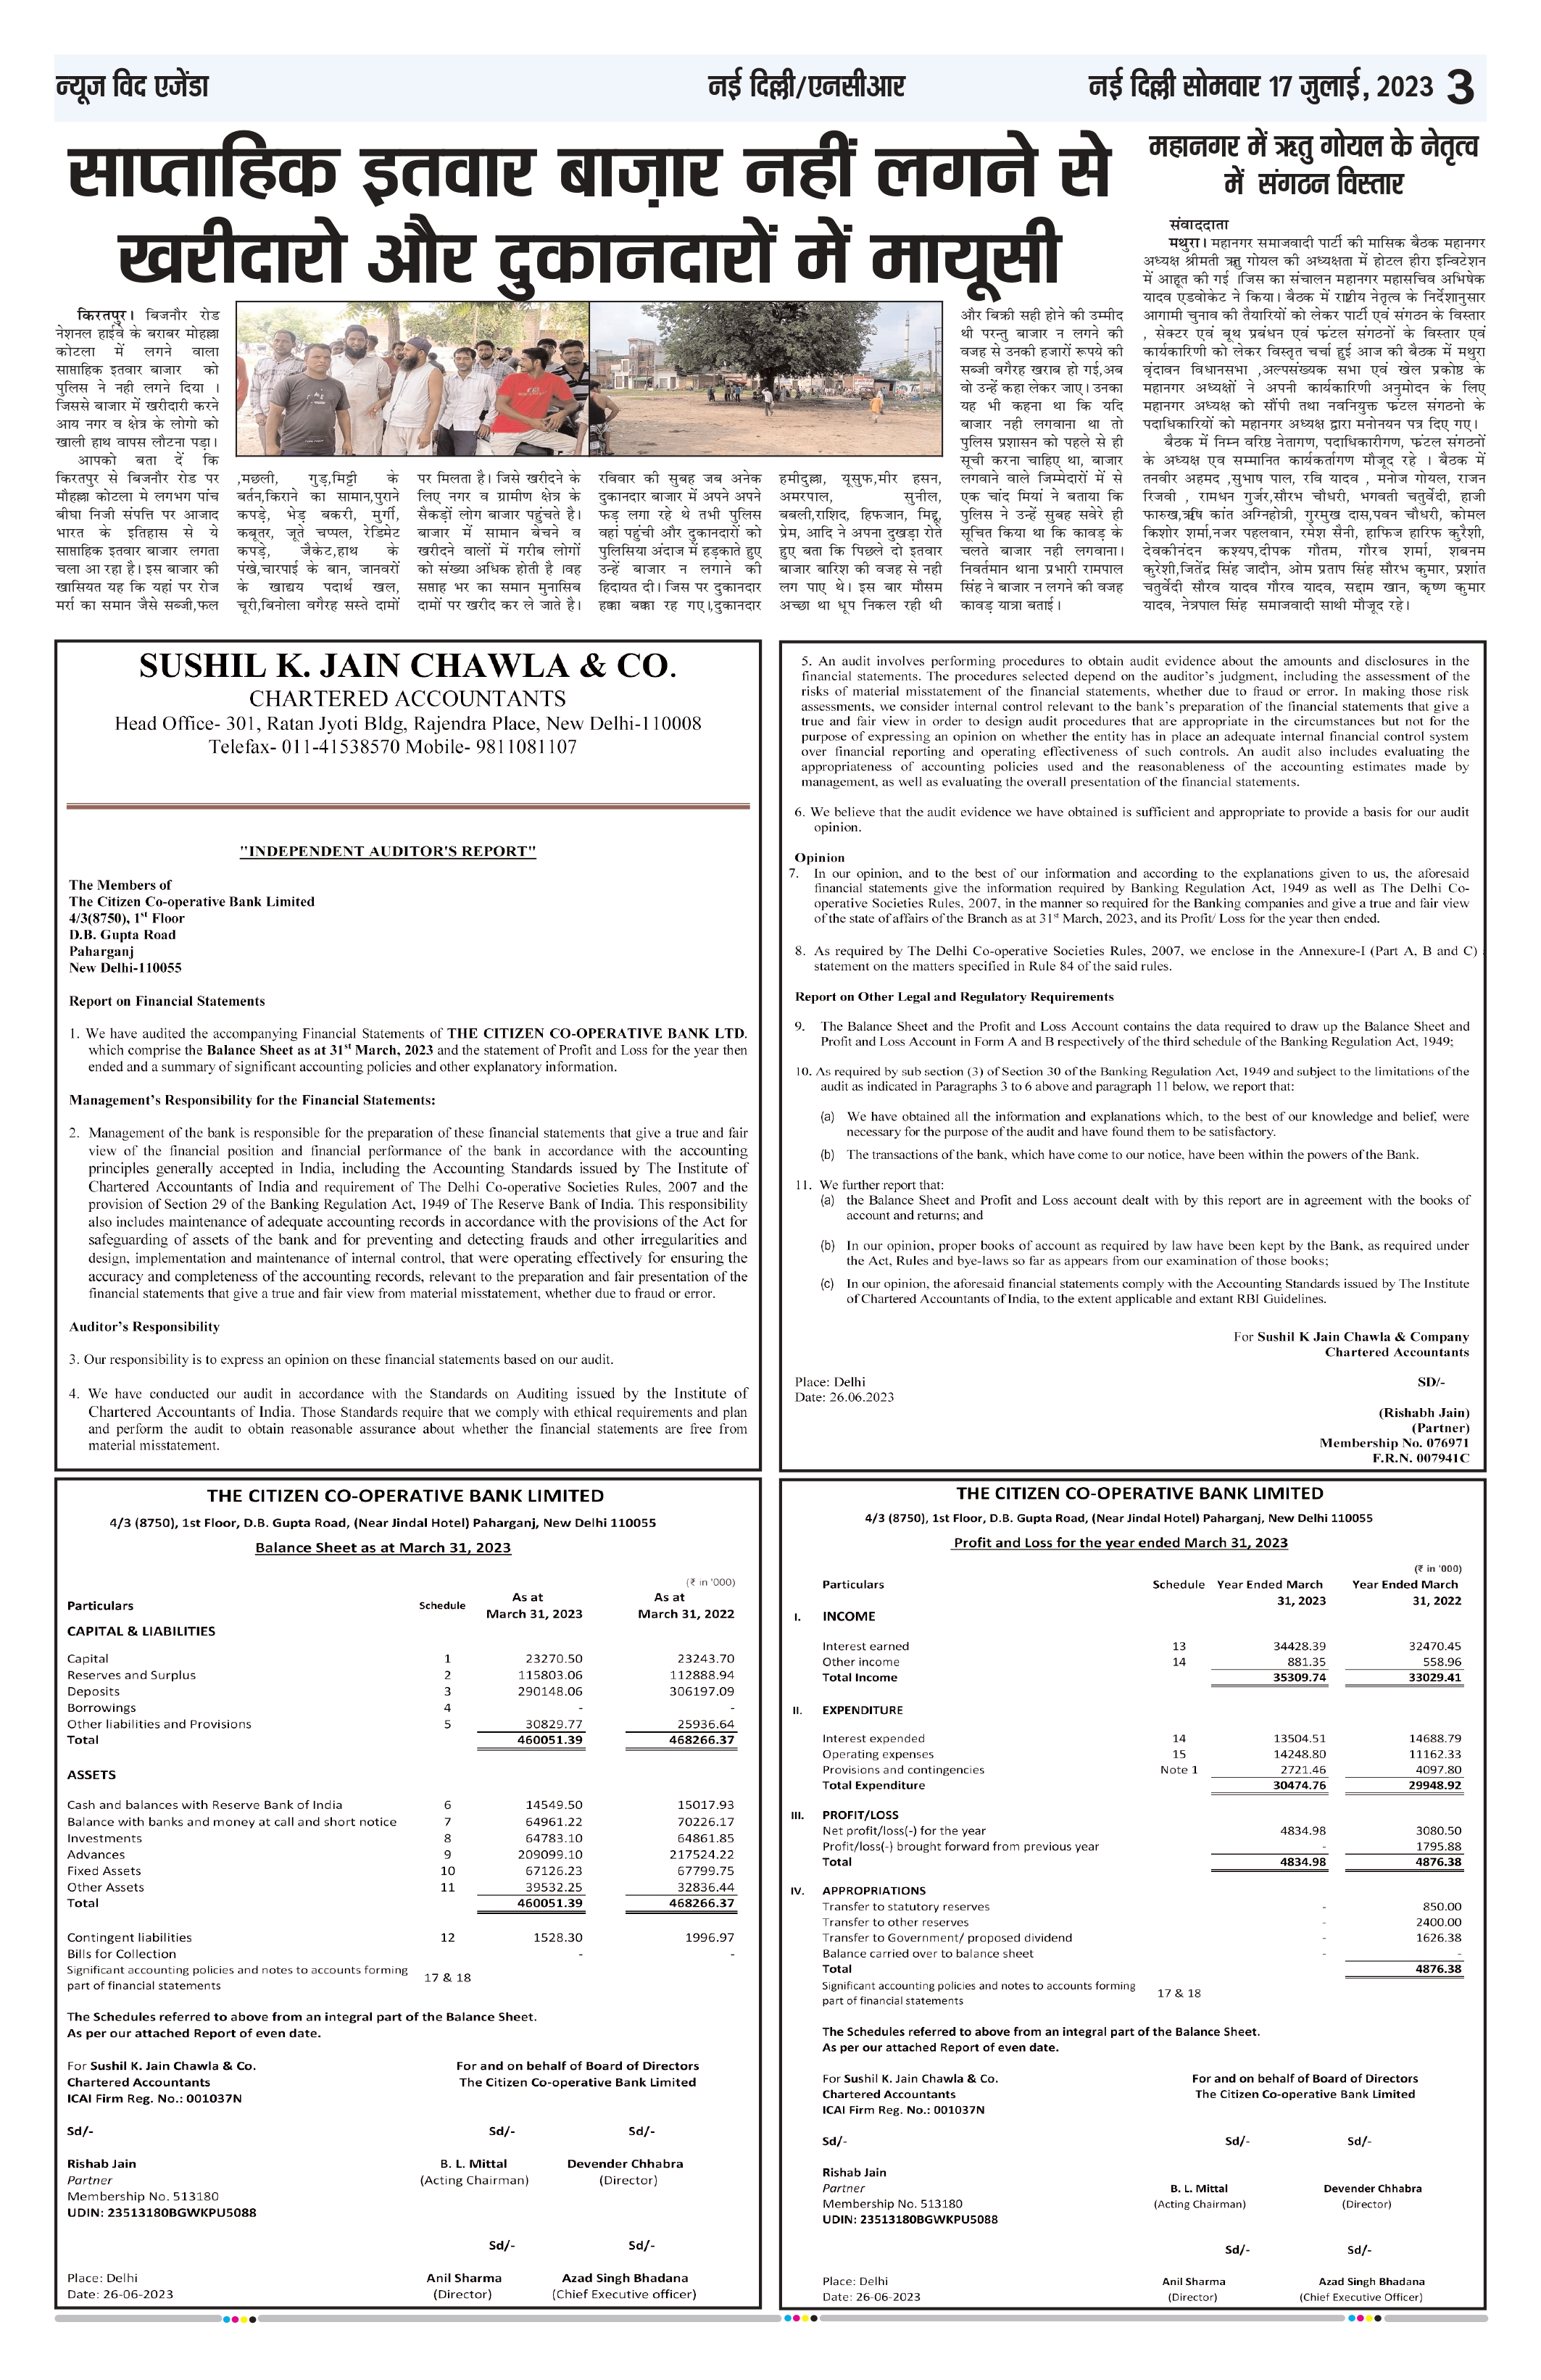 ANNUAL RESULT FY 2022-23 PUBLISH IN NEWSPAER NEWS WITH AGENDA